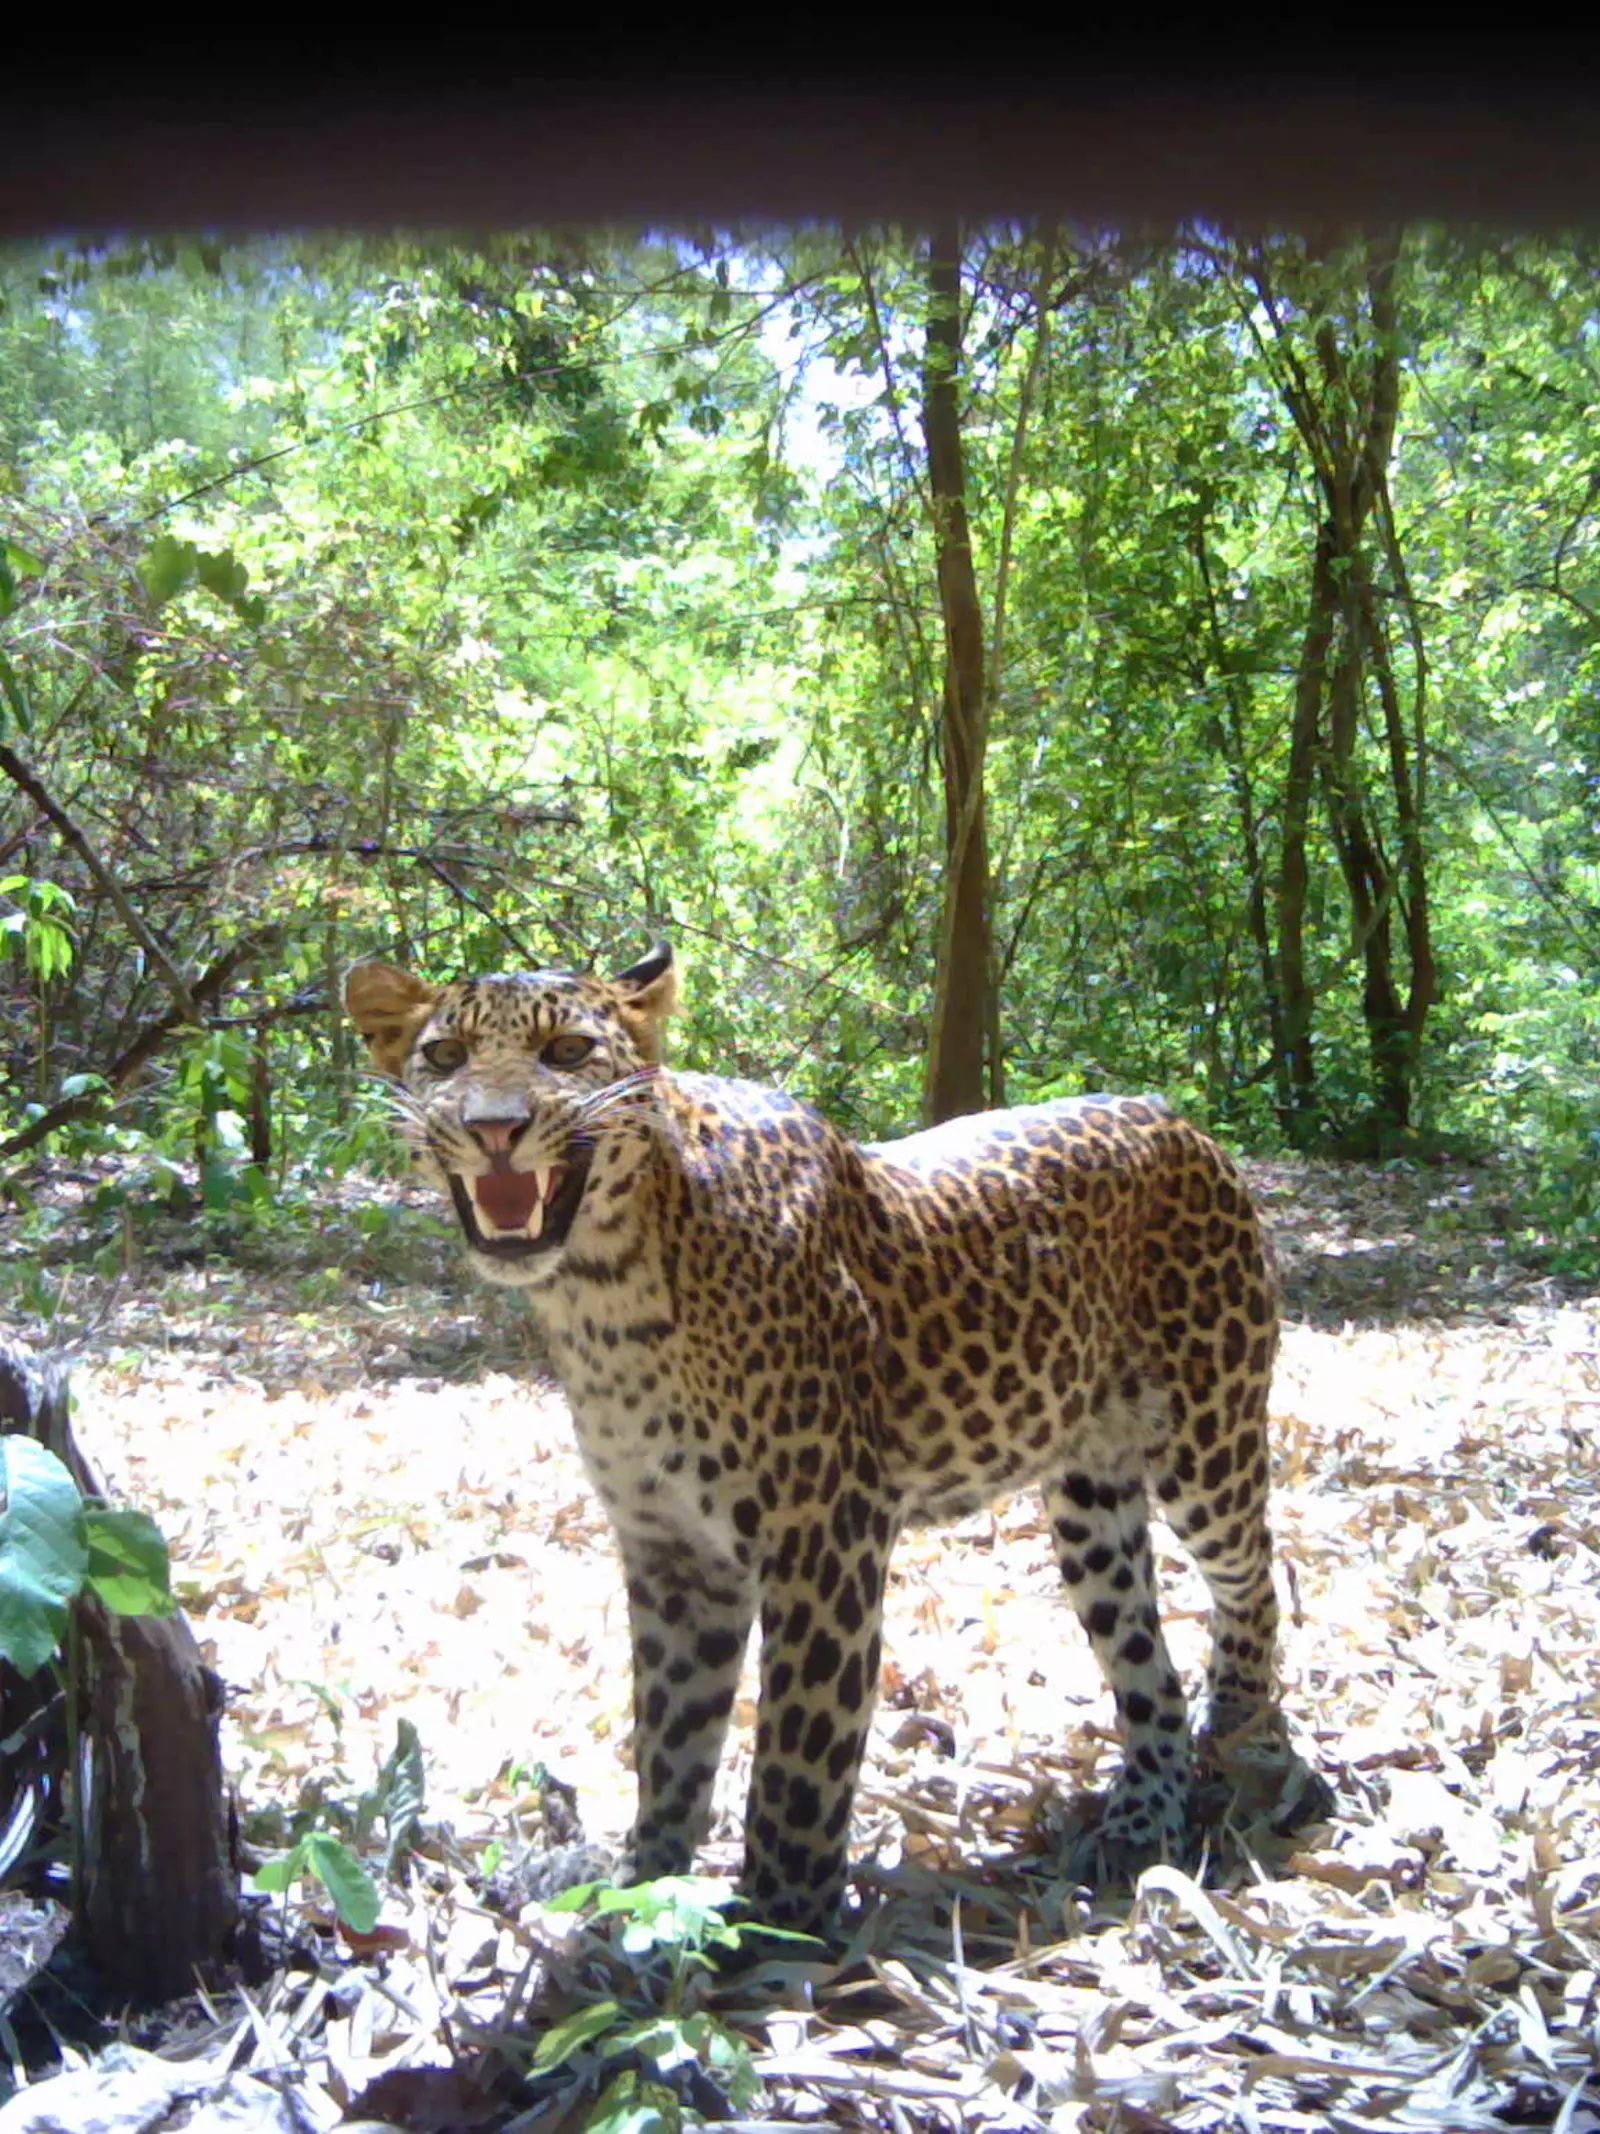 Camera trap image of leopard sniffing baited scent station in Thailand